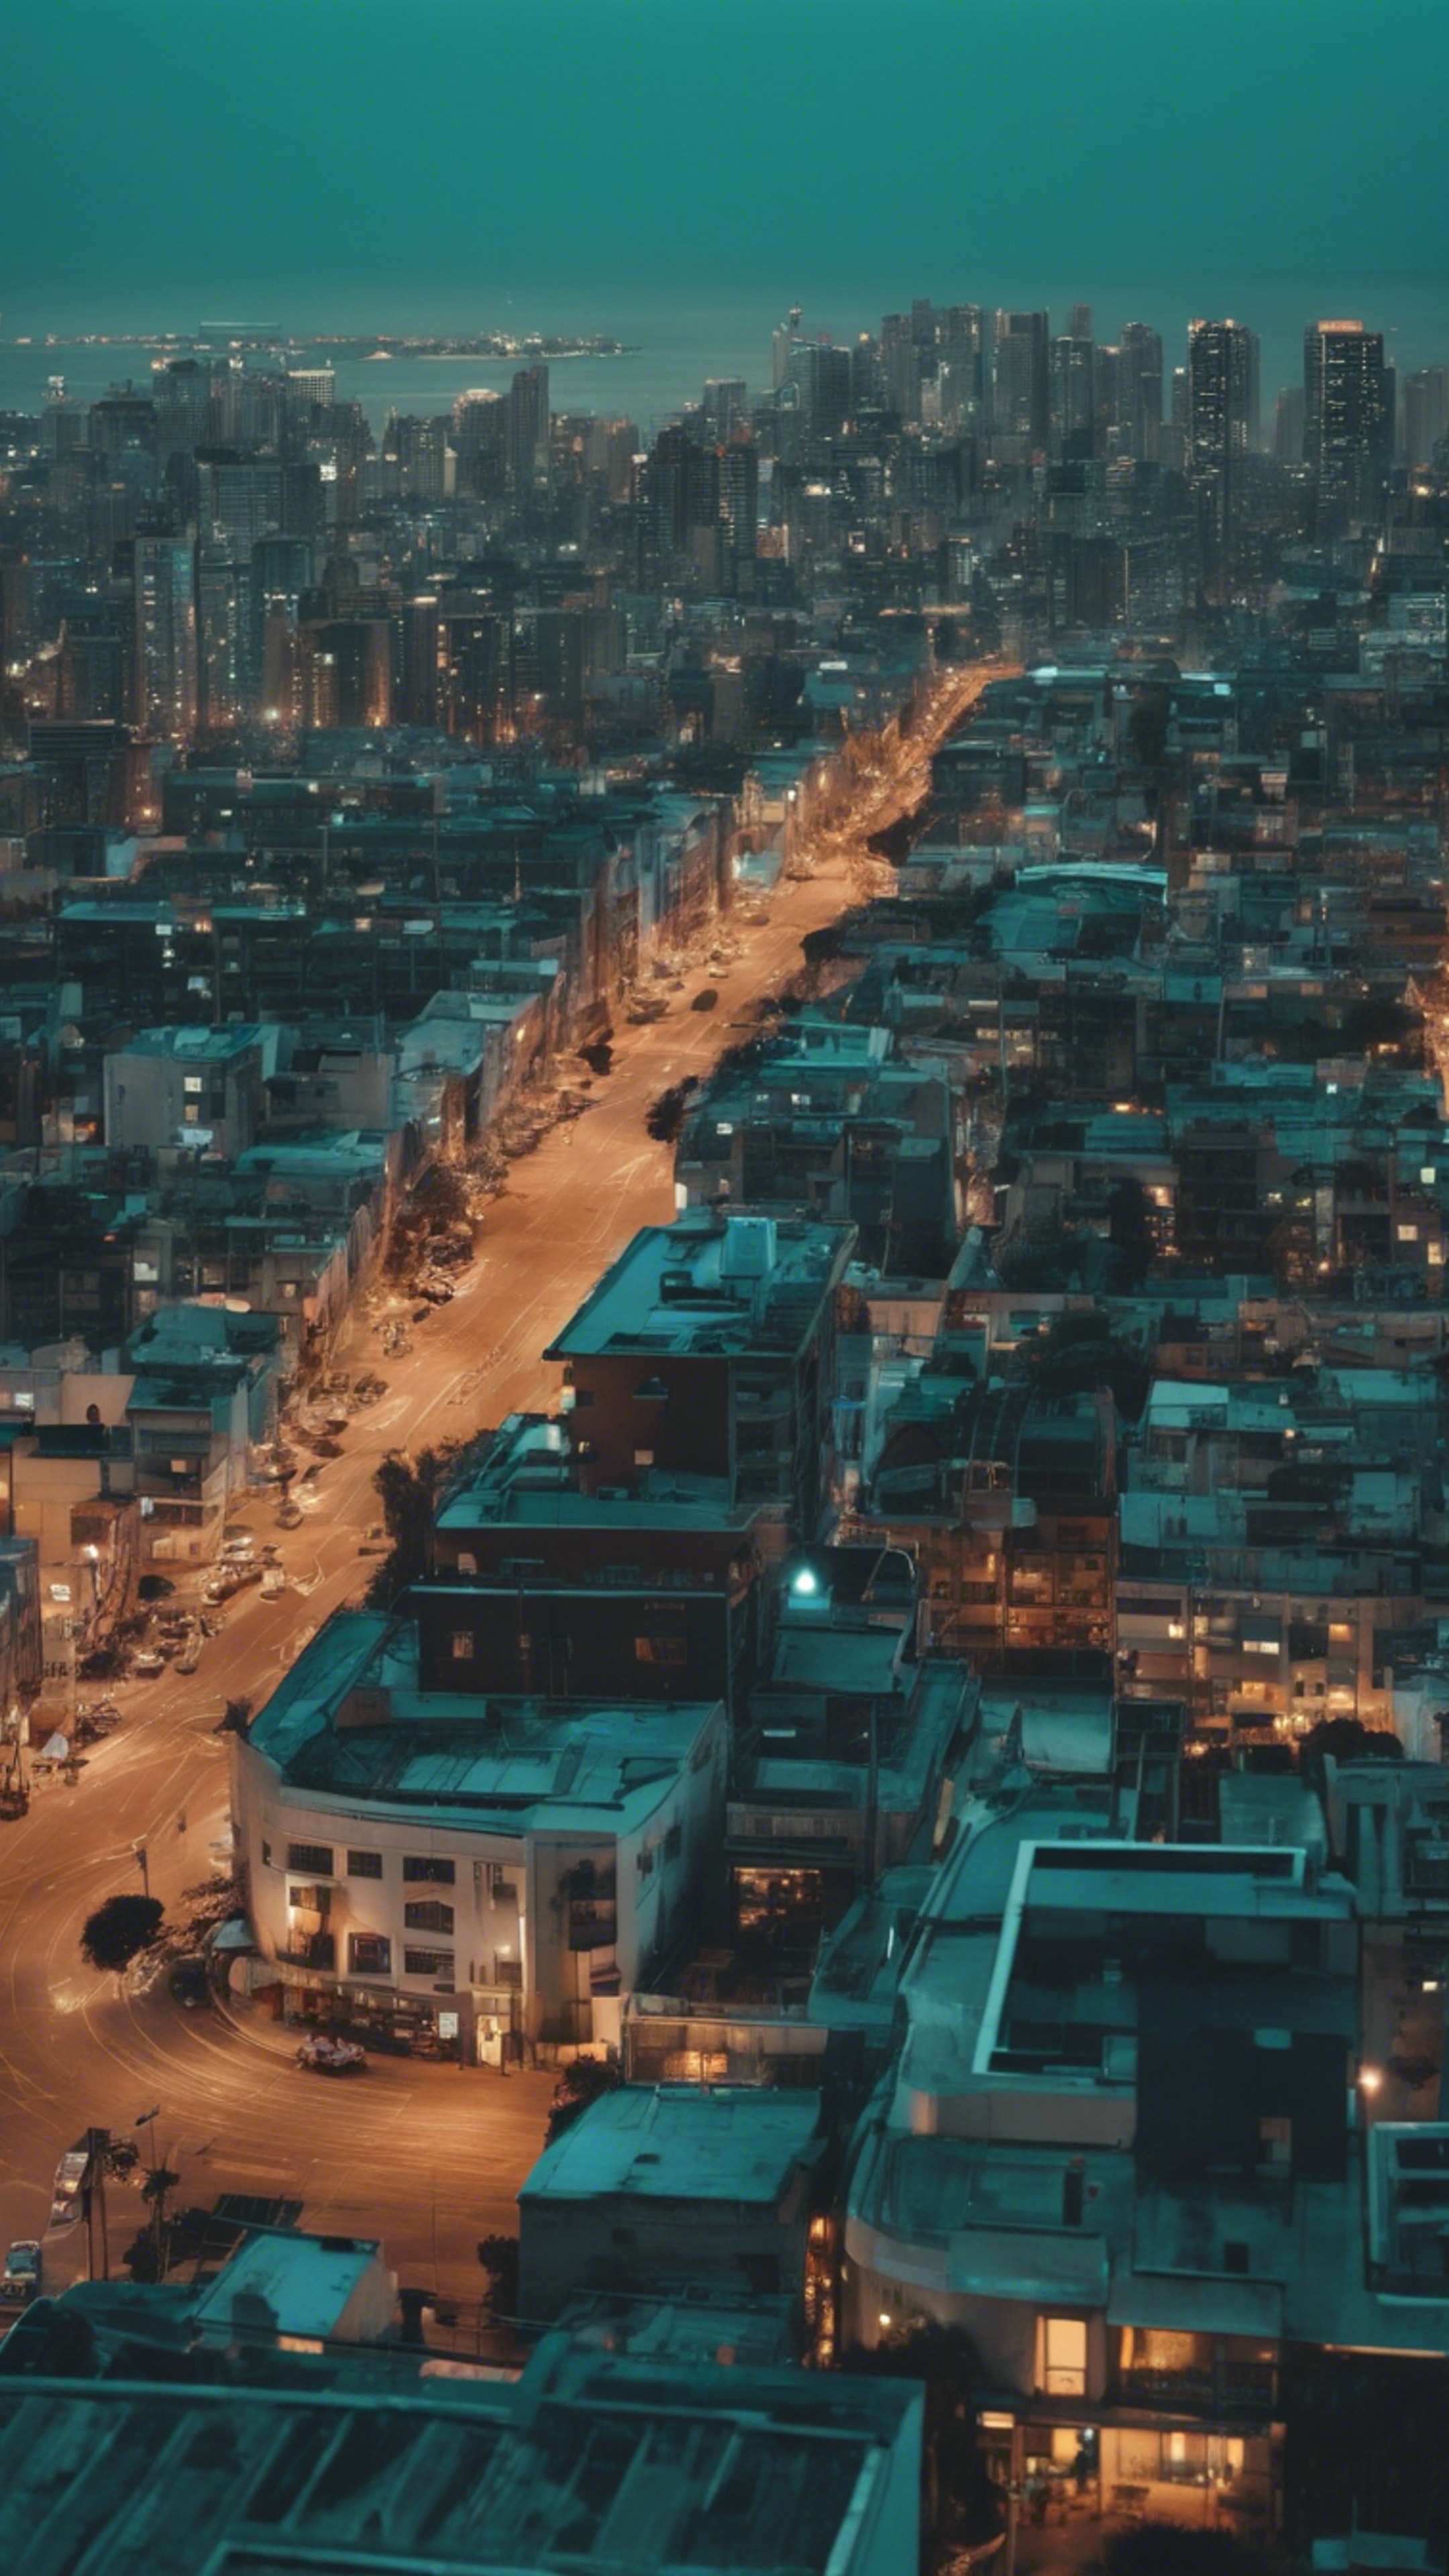 A soft glowing evening in a coastal city during the Y2K era, with buildings and street lights illuminating a teal hue against the dark night sky. Hình nền[d5088c89c81a4386bdc0]